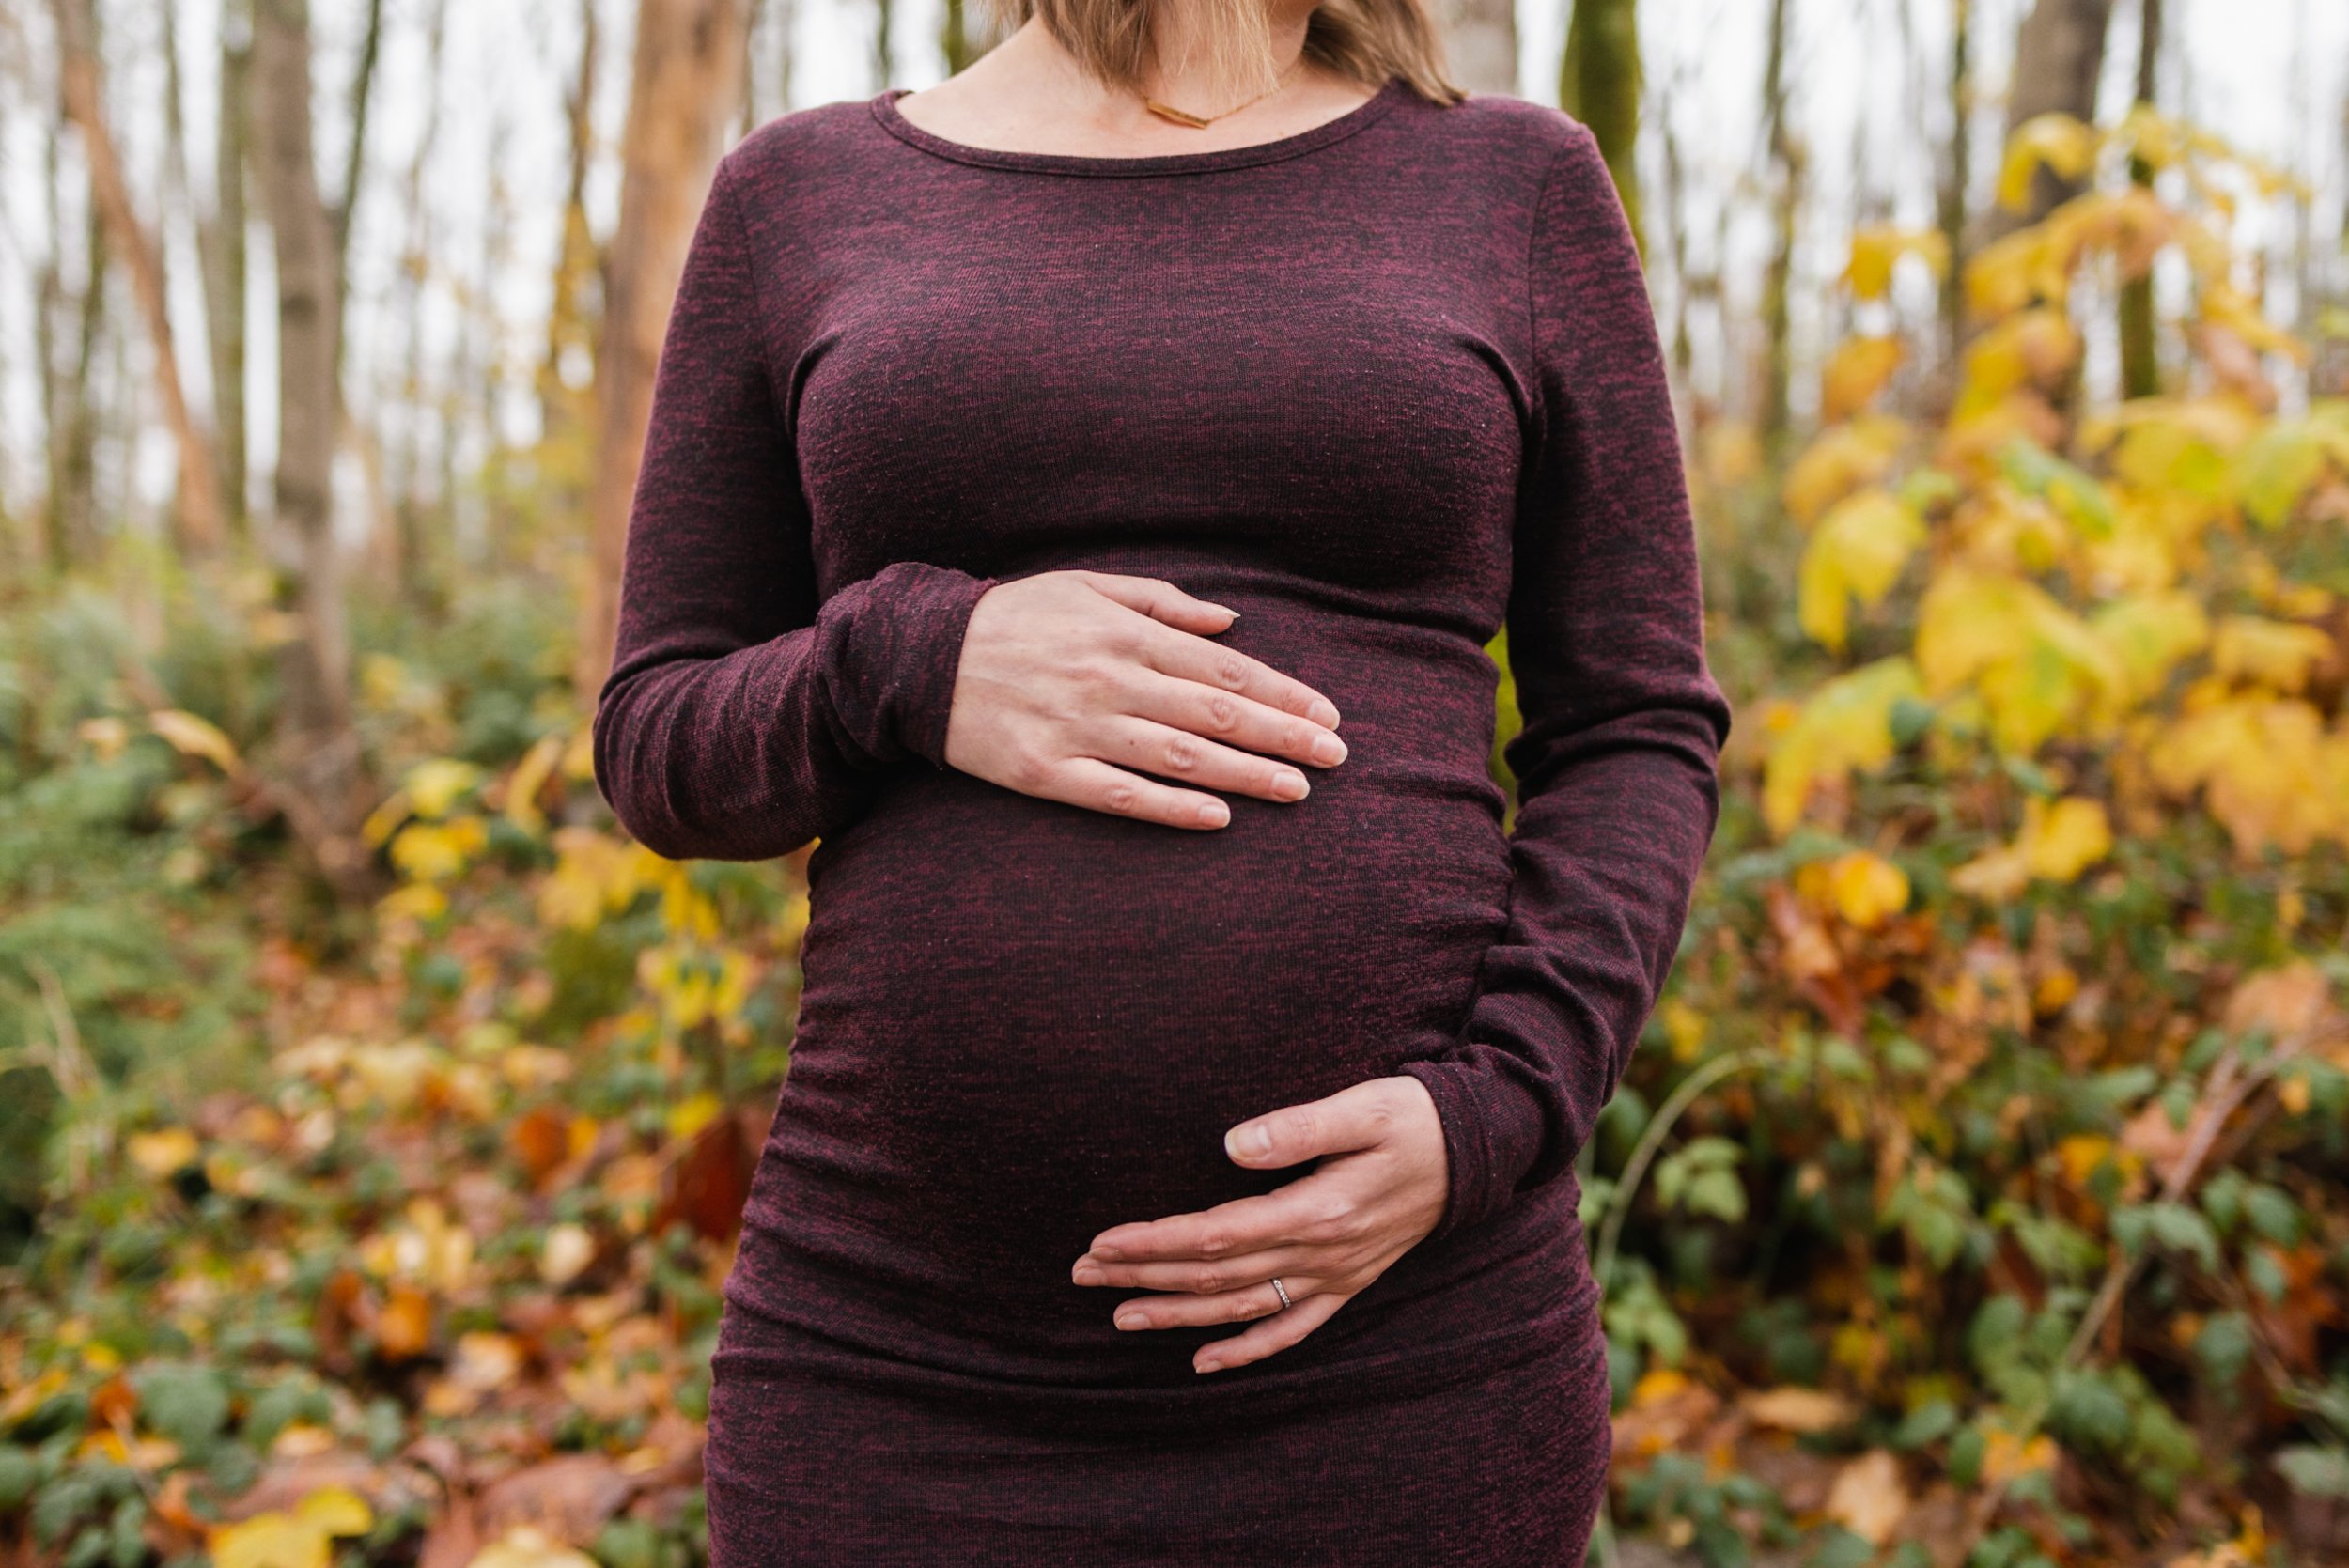 Pregnant woman burgundy dress in forest holding belly